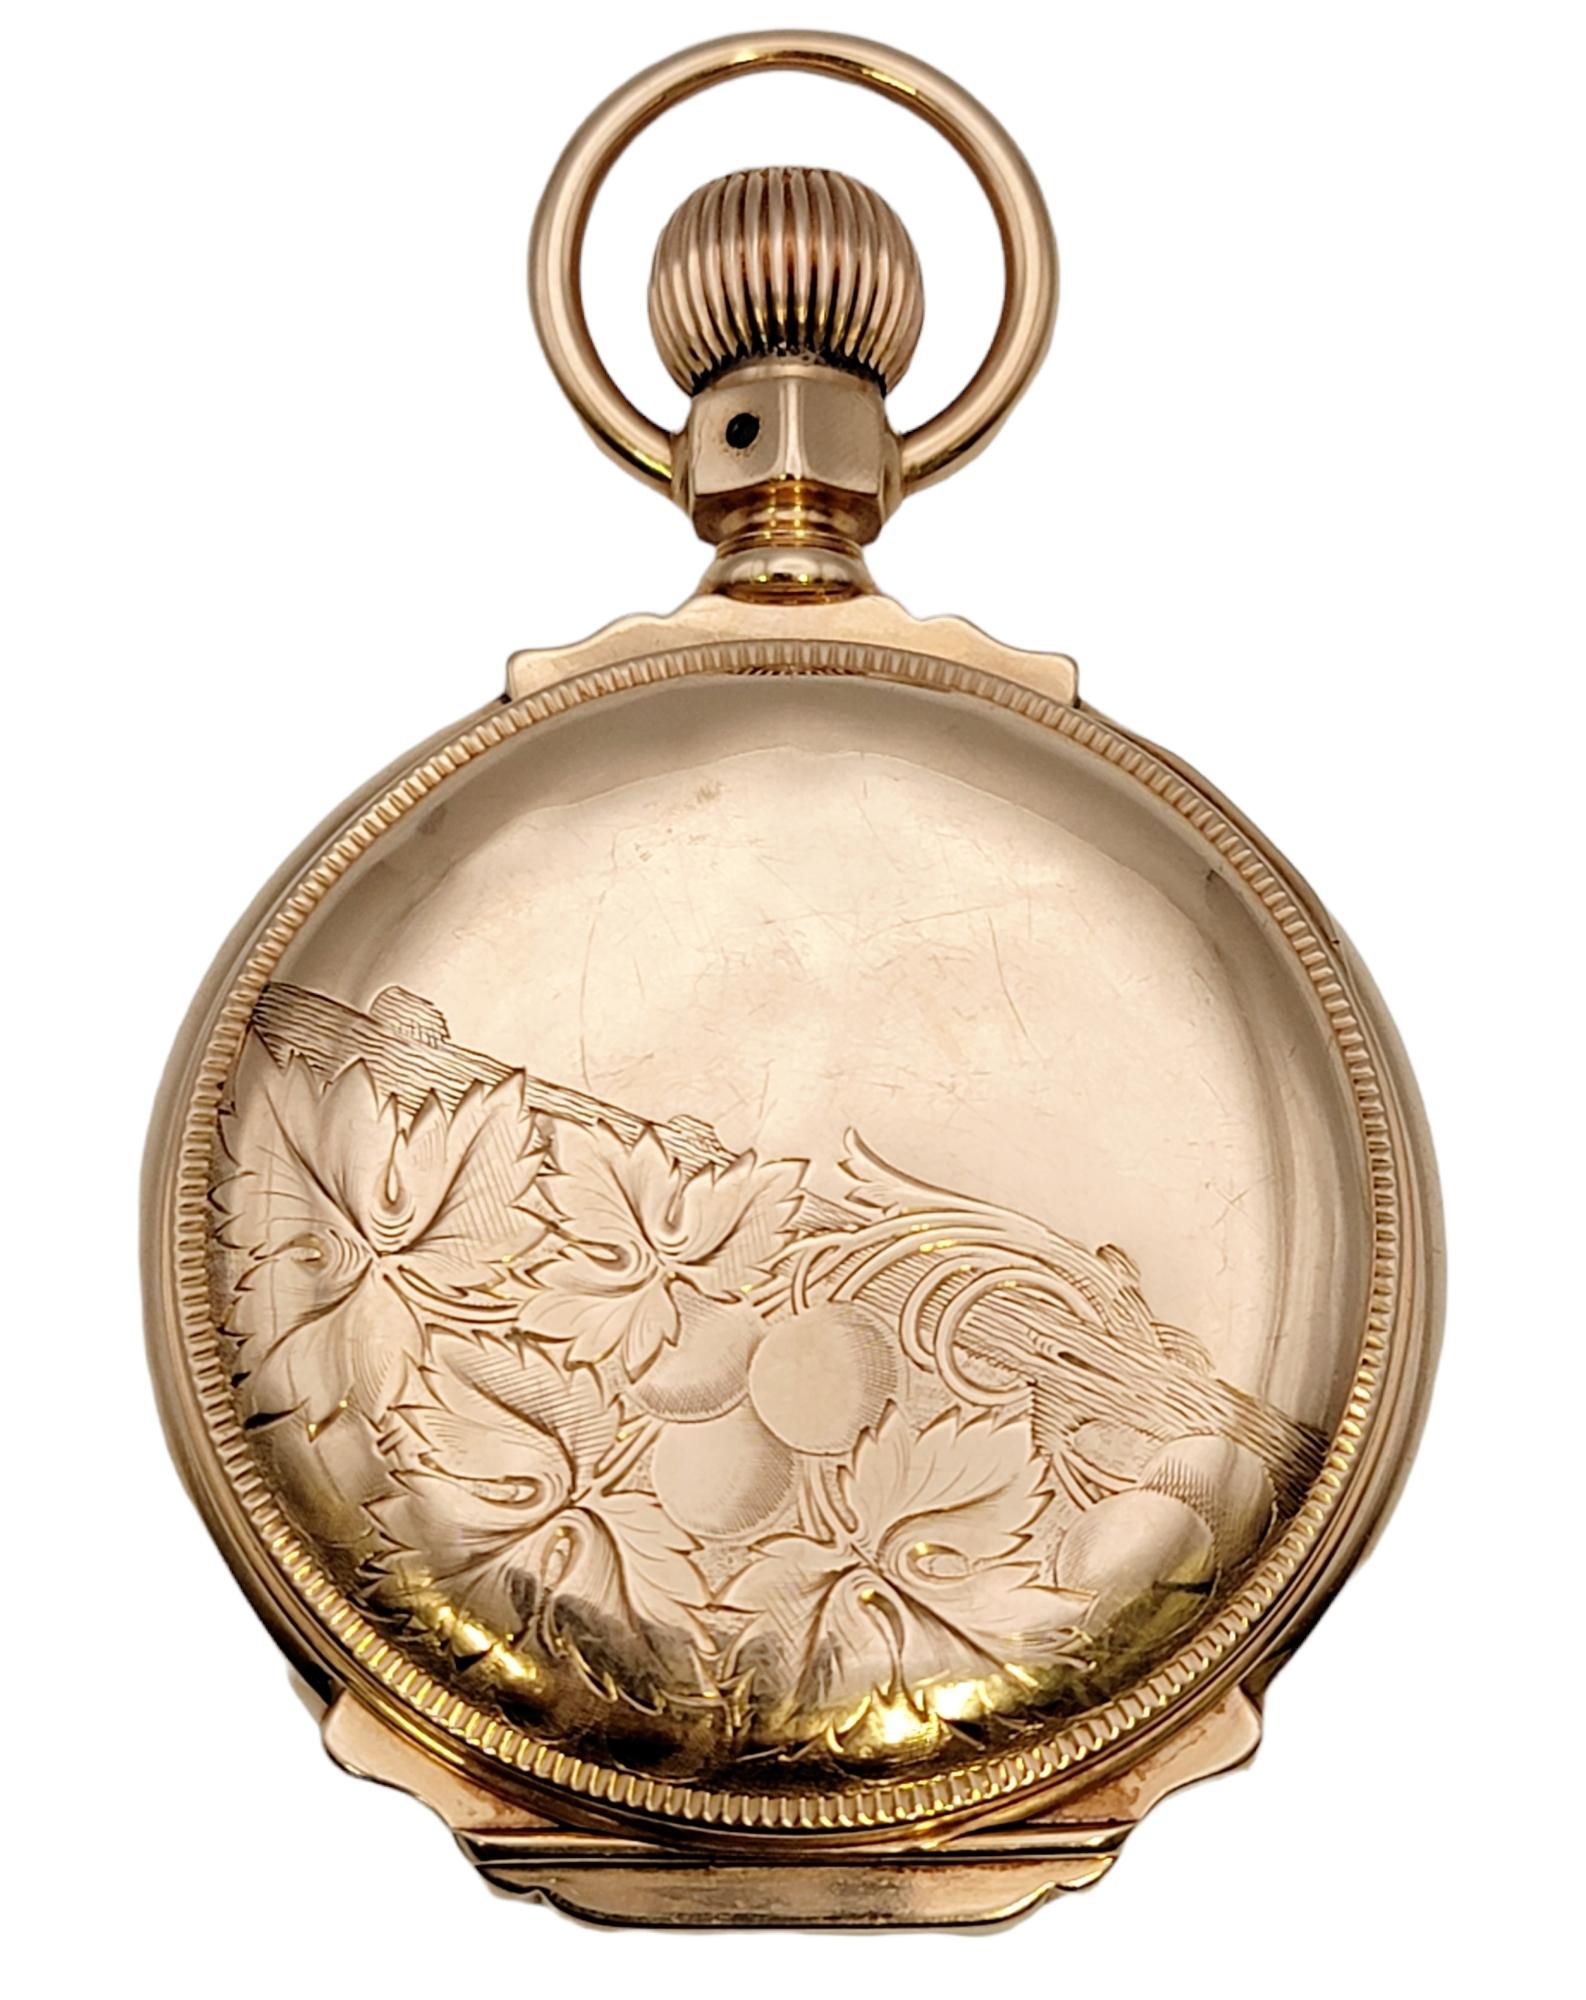 This rare vintage 14 karat gold pocket watch by Waltham is a stunning piece of history. The luxury solid gold timepiece is made with exquisite fine details. It features a 46mm case with a round white dial and black Roman Numeral hour markers. Also